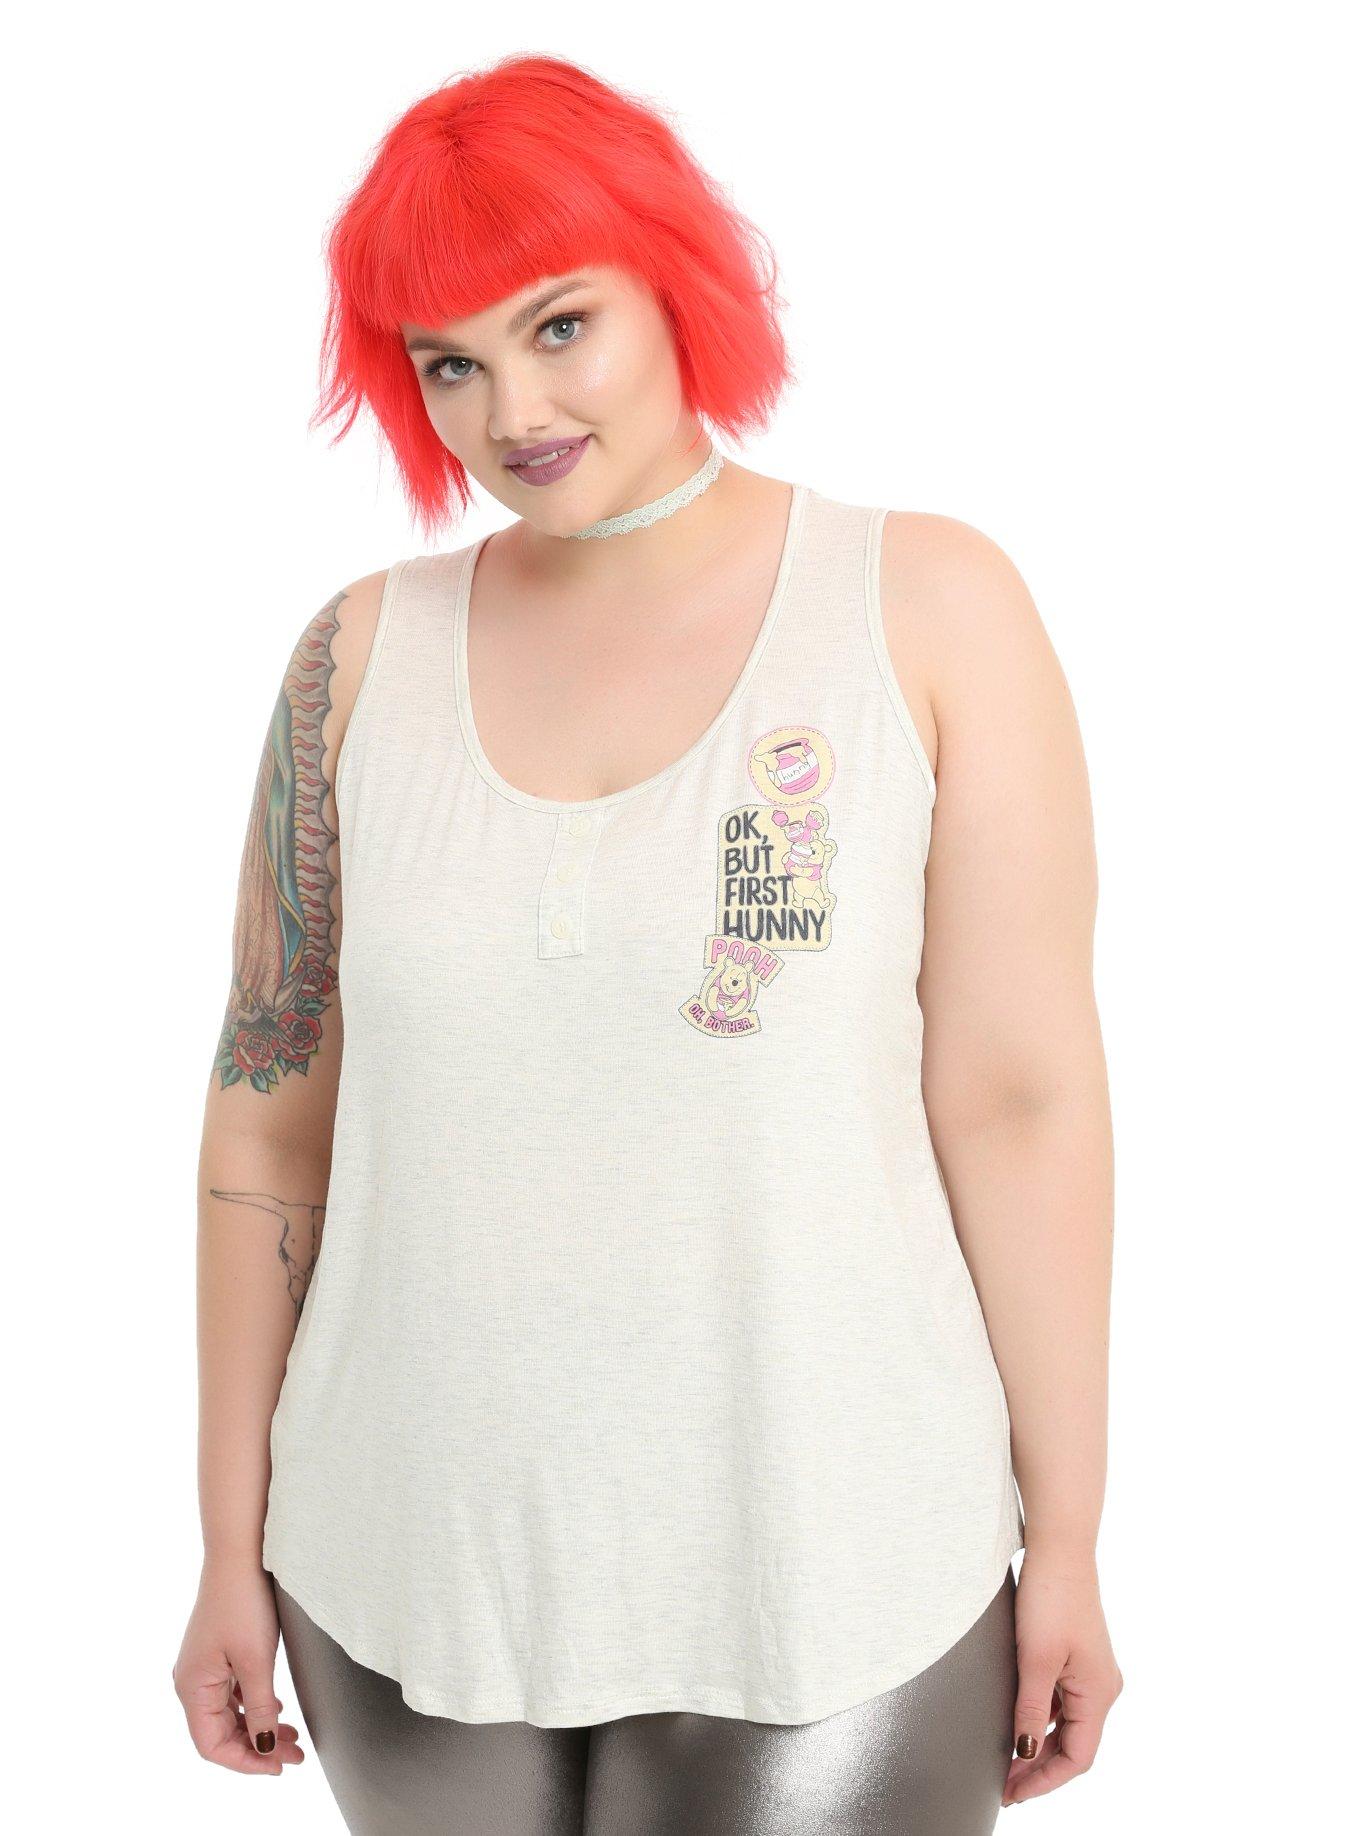 Disney Winnie The Pooh OK But First Hunny Patches Girls Tank Top Plus Size, WHITE, hi-res